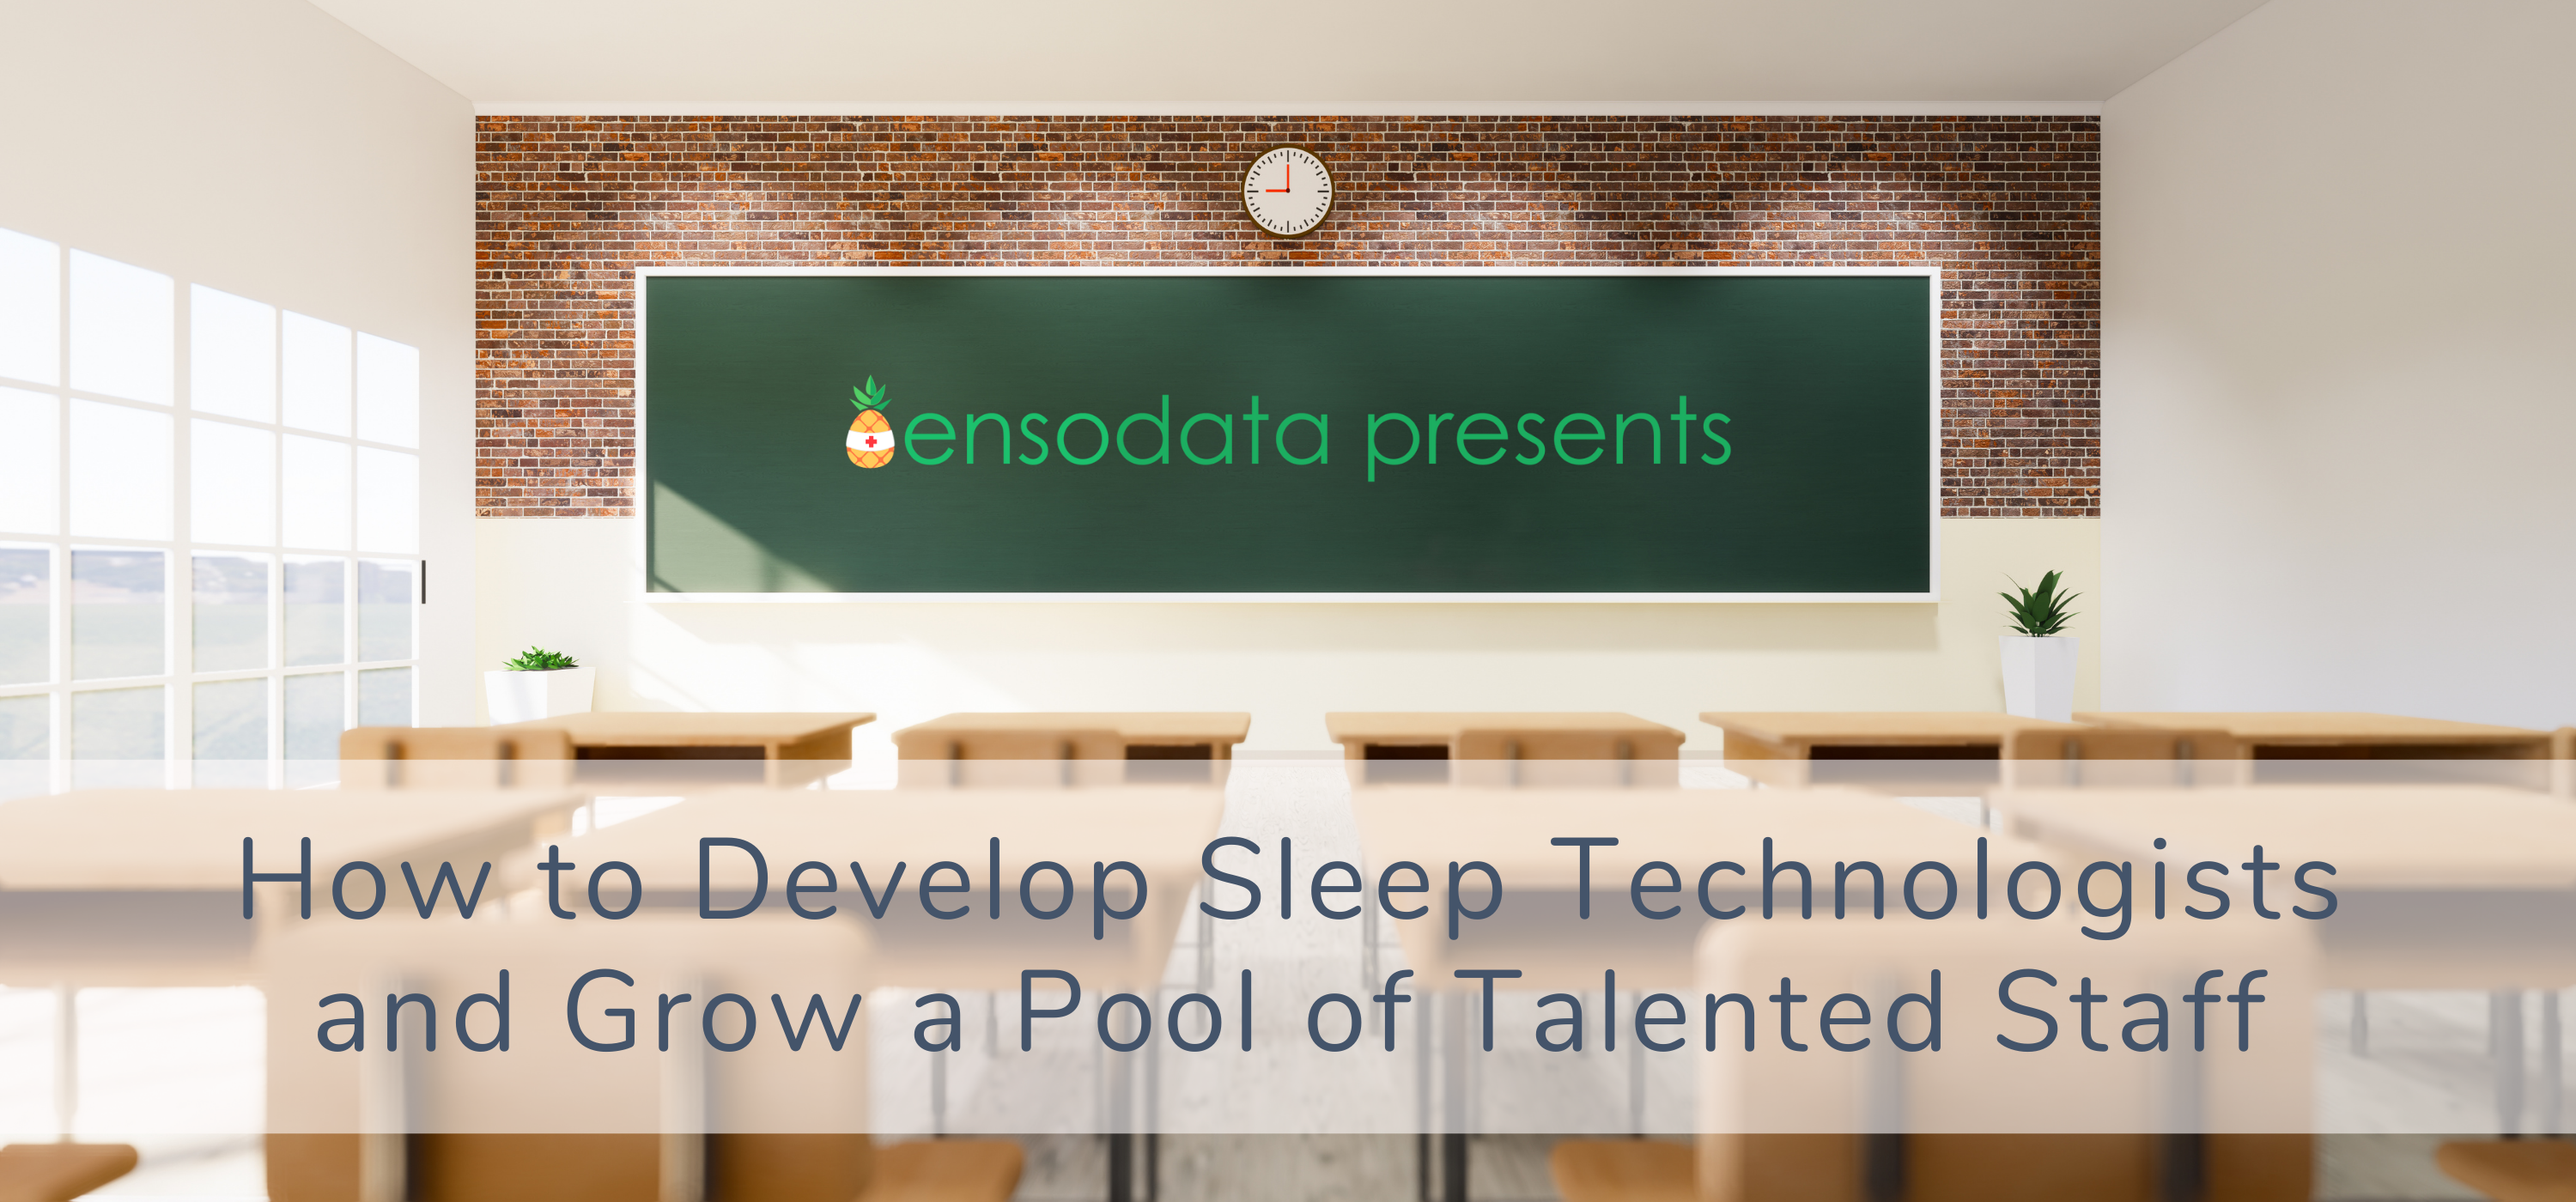 How to Develop Sleep Technologists and Grow a Pool of Talented Staff